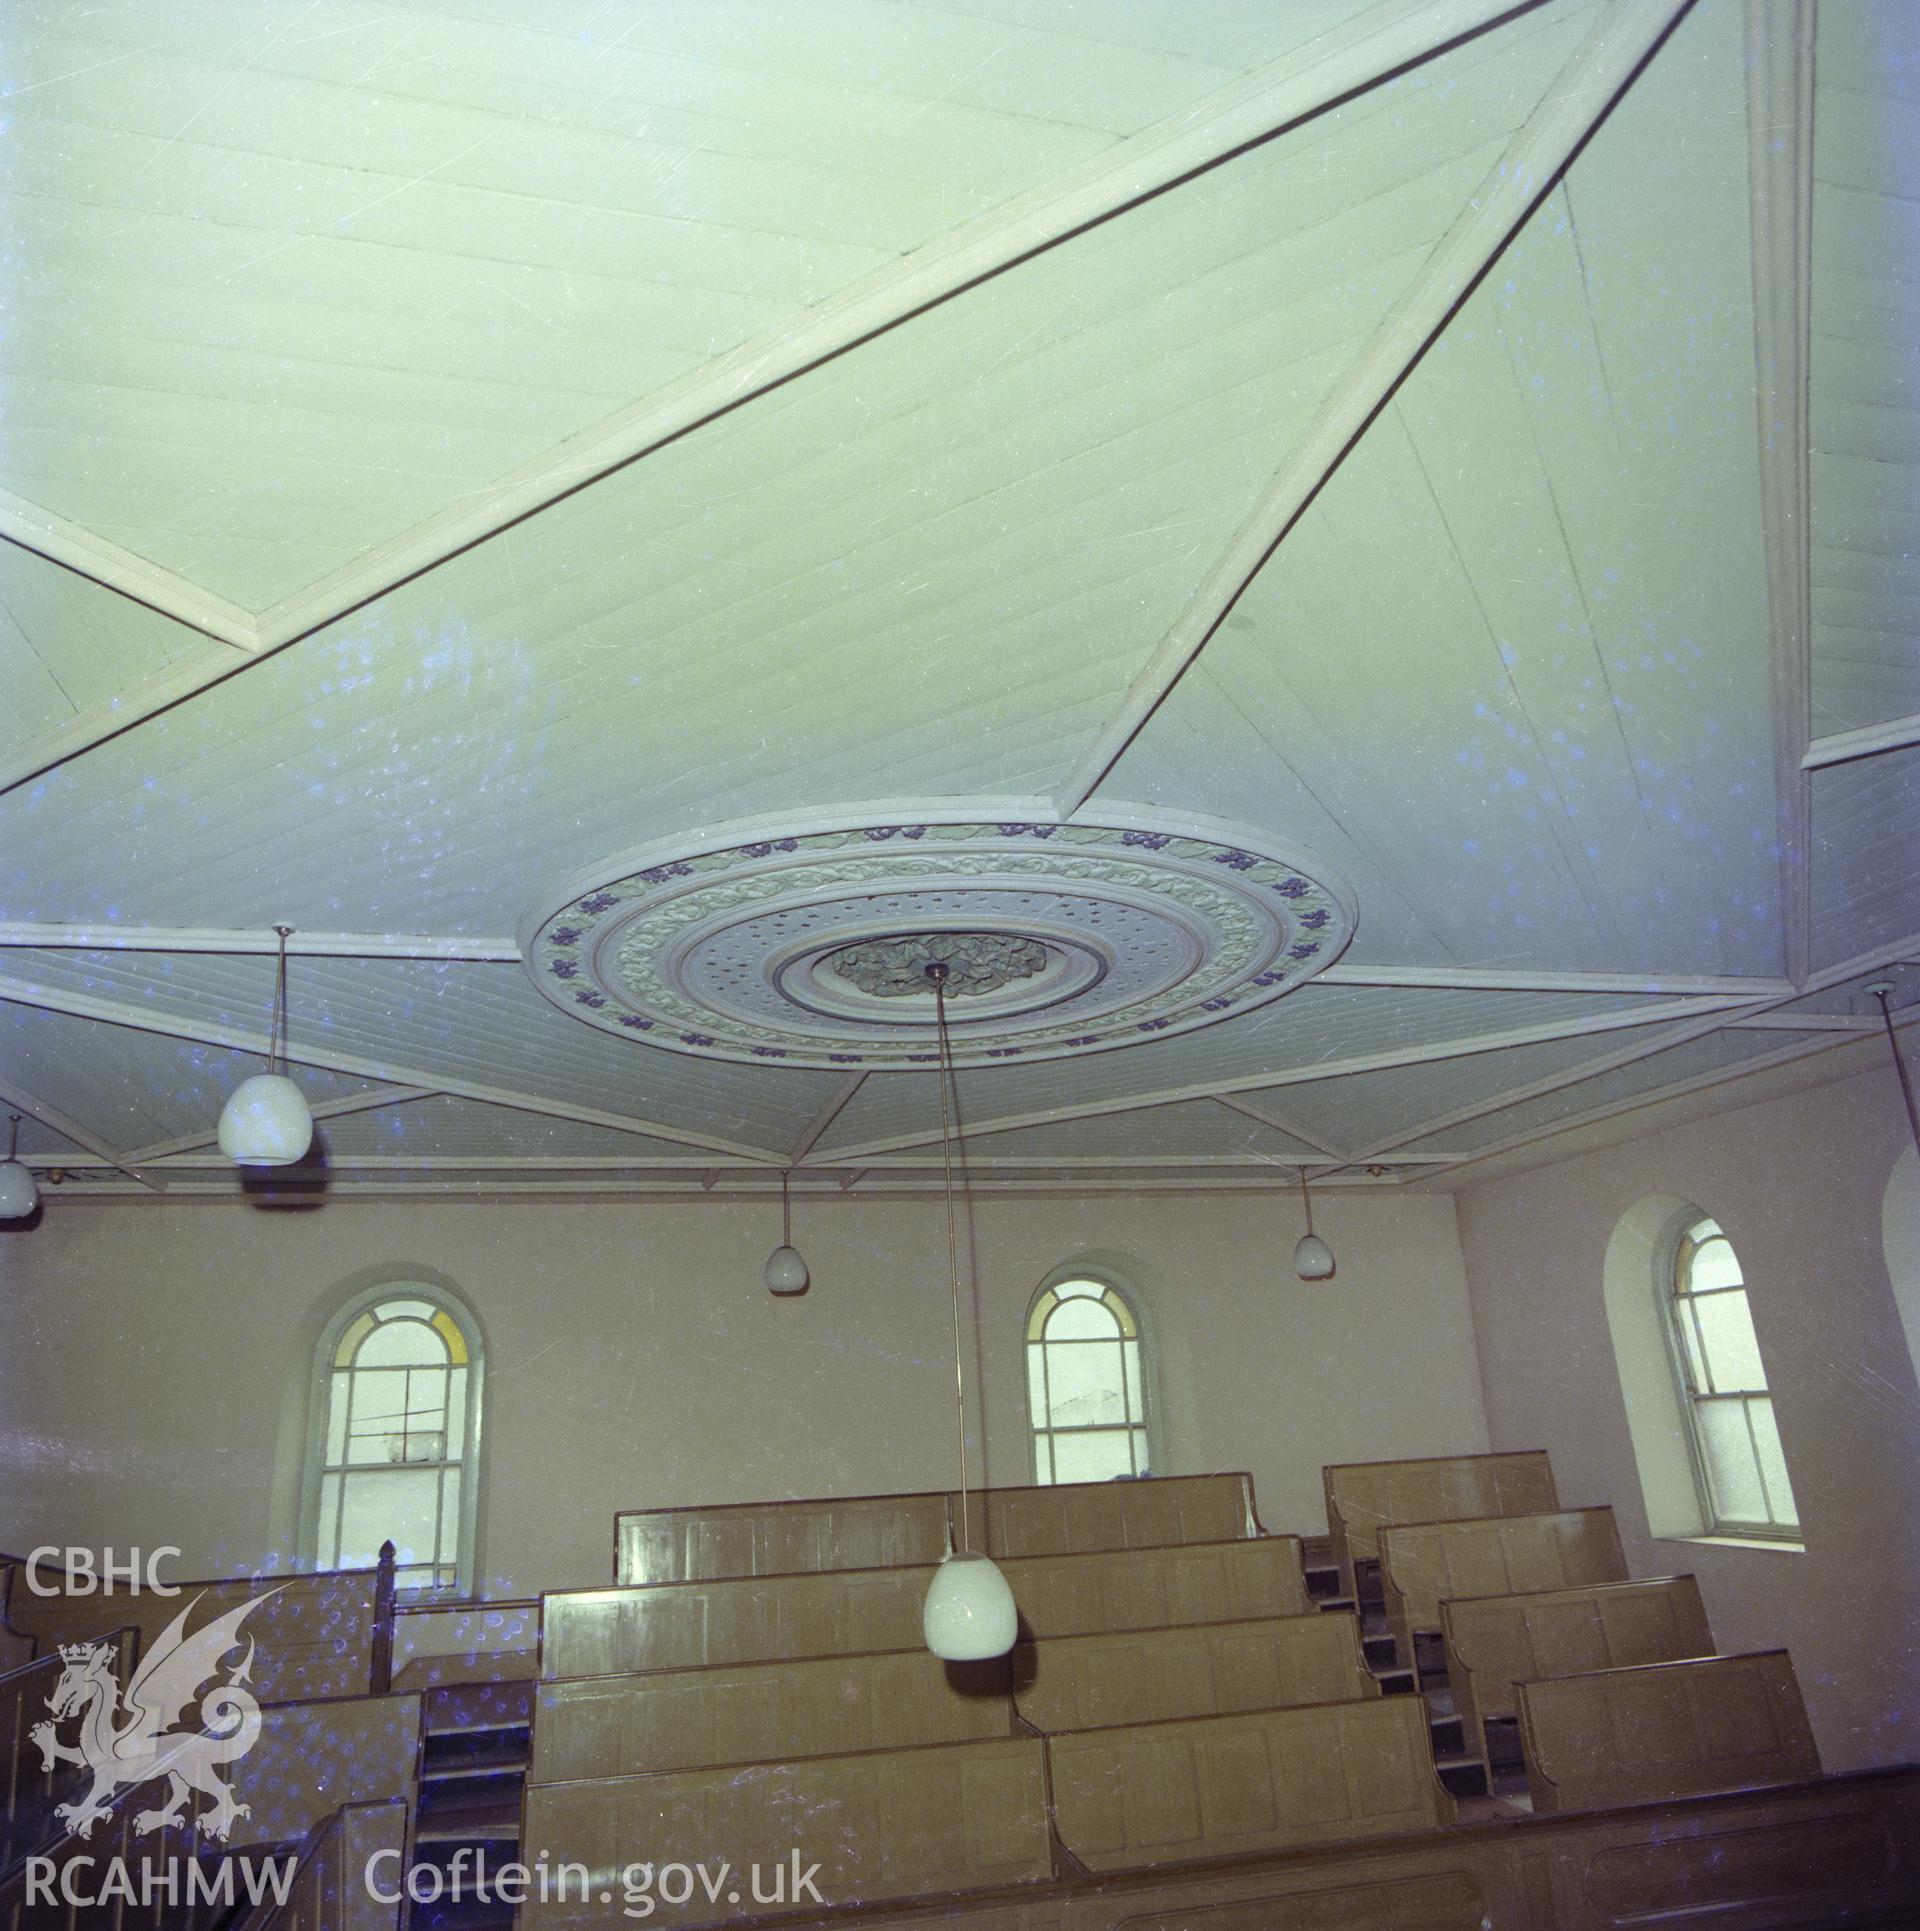 Digital copy of a colour negative showing an interior view of Caersalem Chapel, taken by RCAHMW.